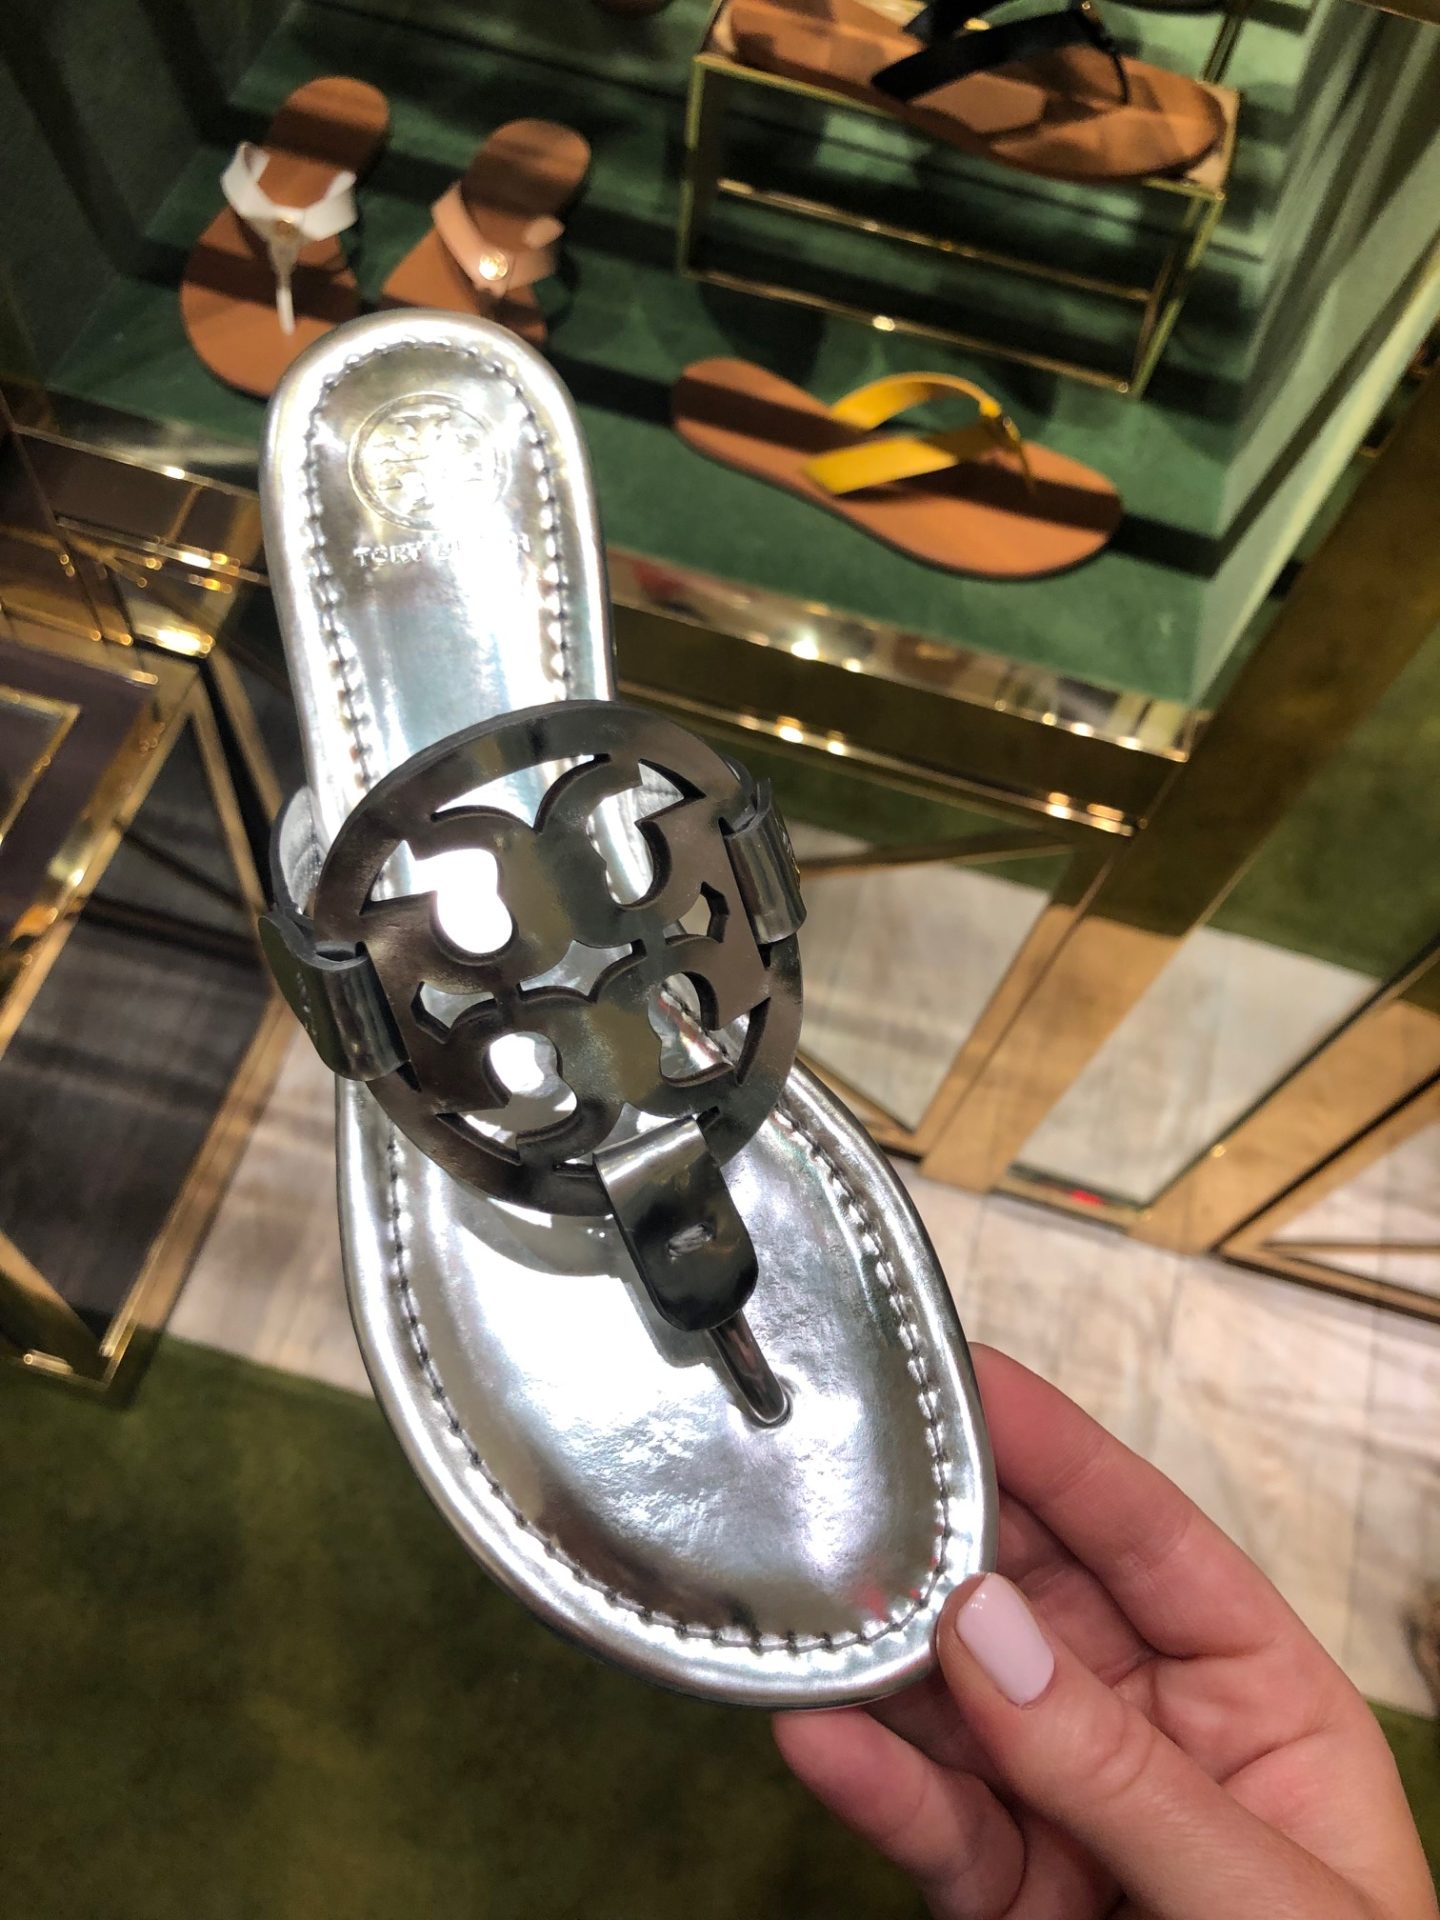 25% Off Tory Burch Miller Promo! - The Double Take Girls